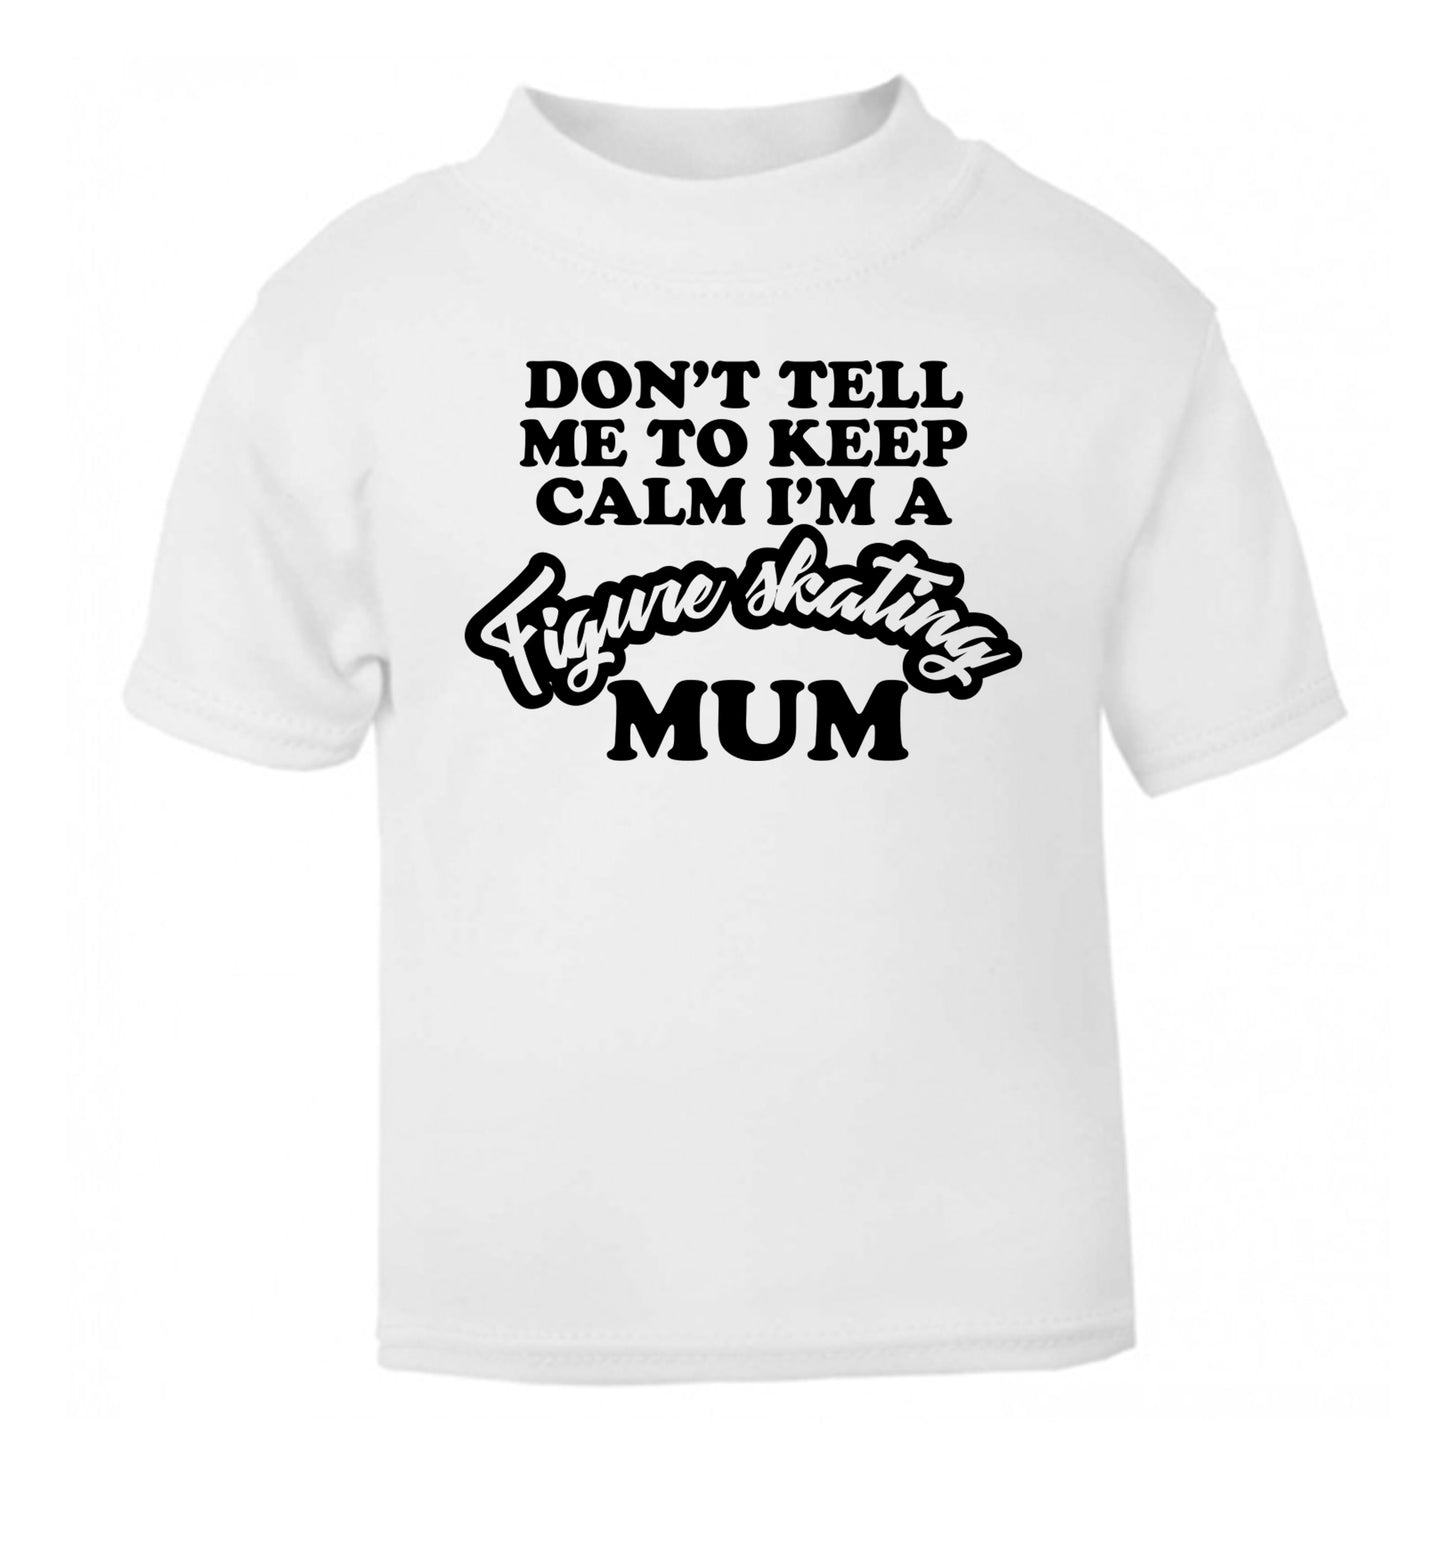 Don't tell me to keep calm I'm a figure skating mum white Baby Toddler Tshirt 2 Years